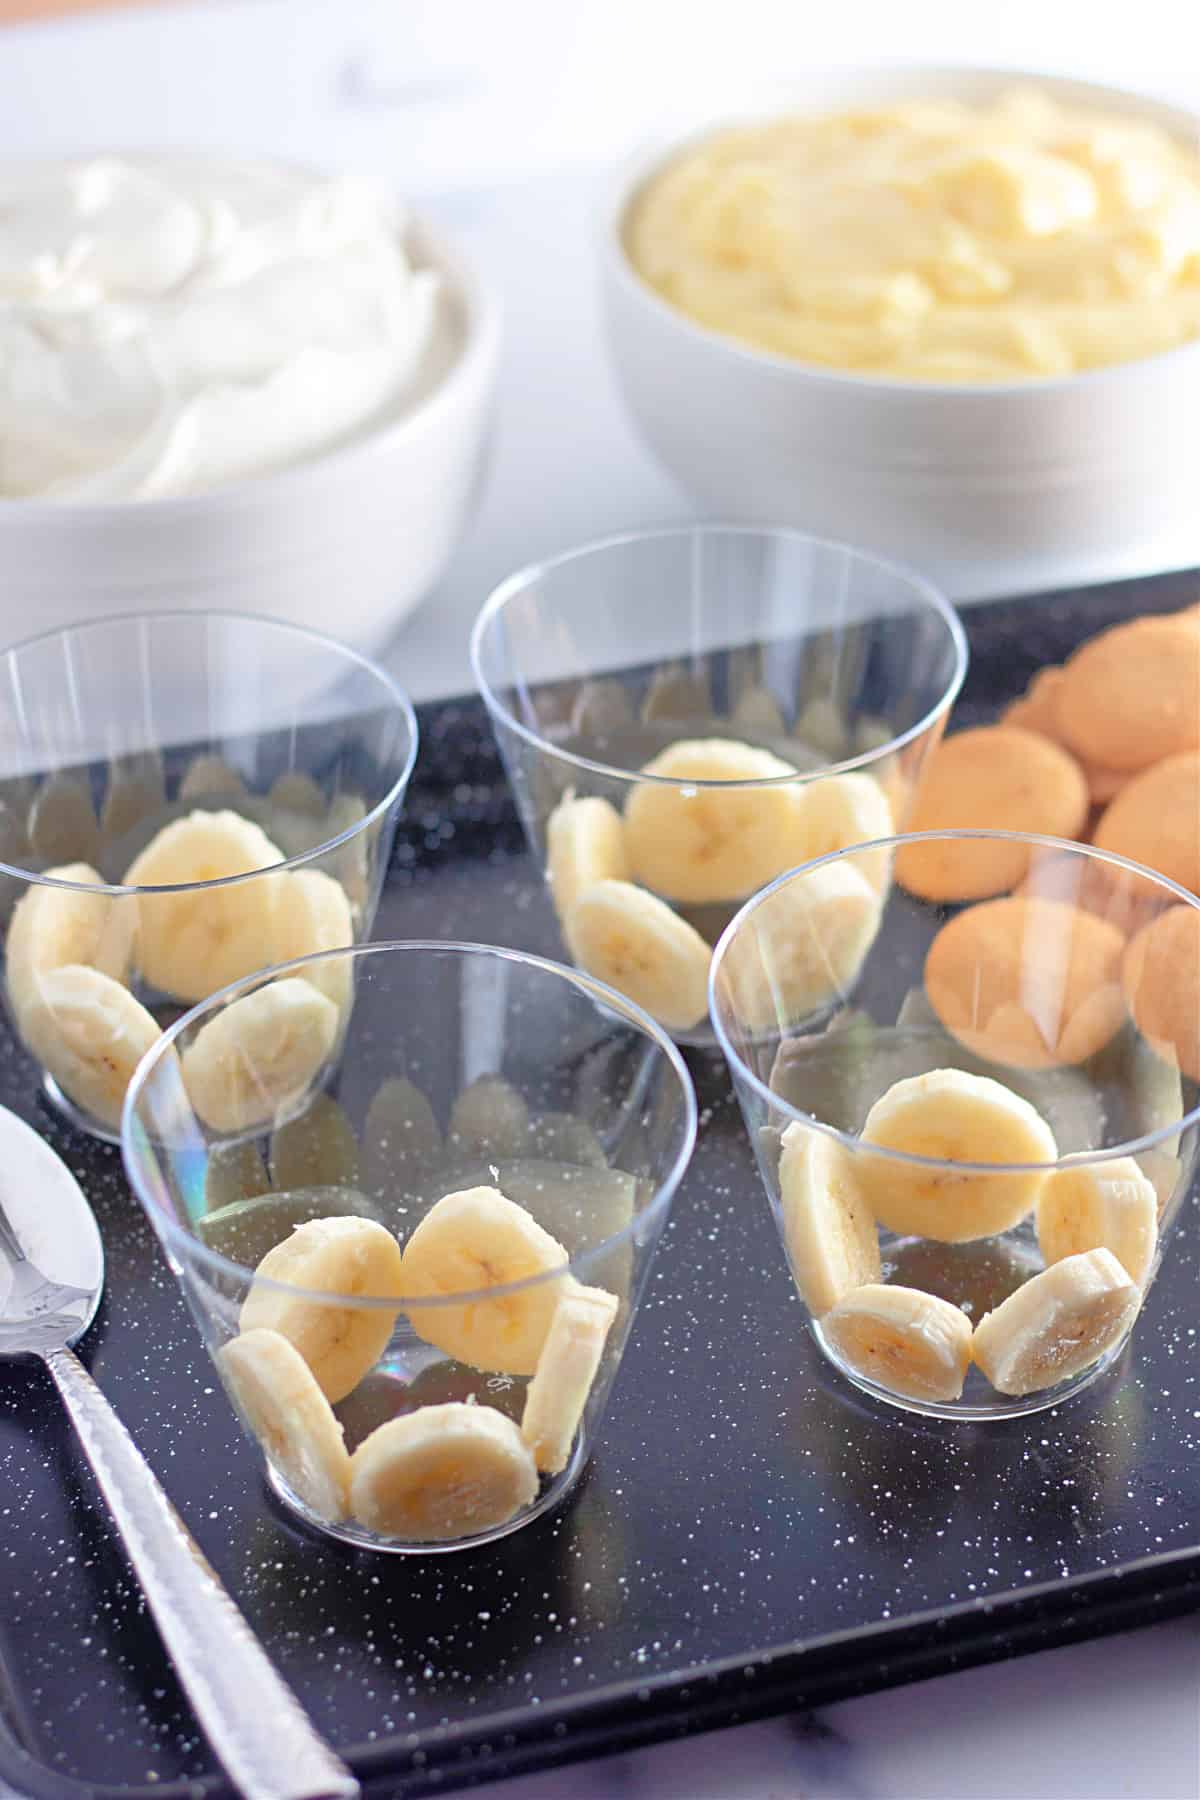 Cups with slices of banana.